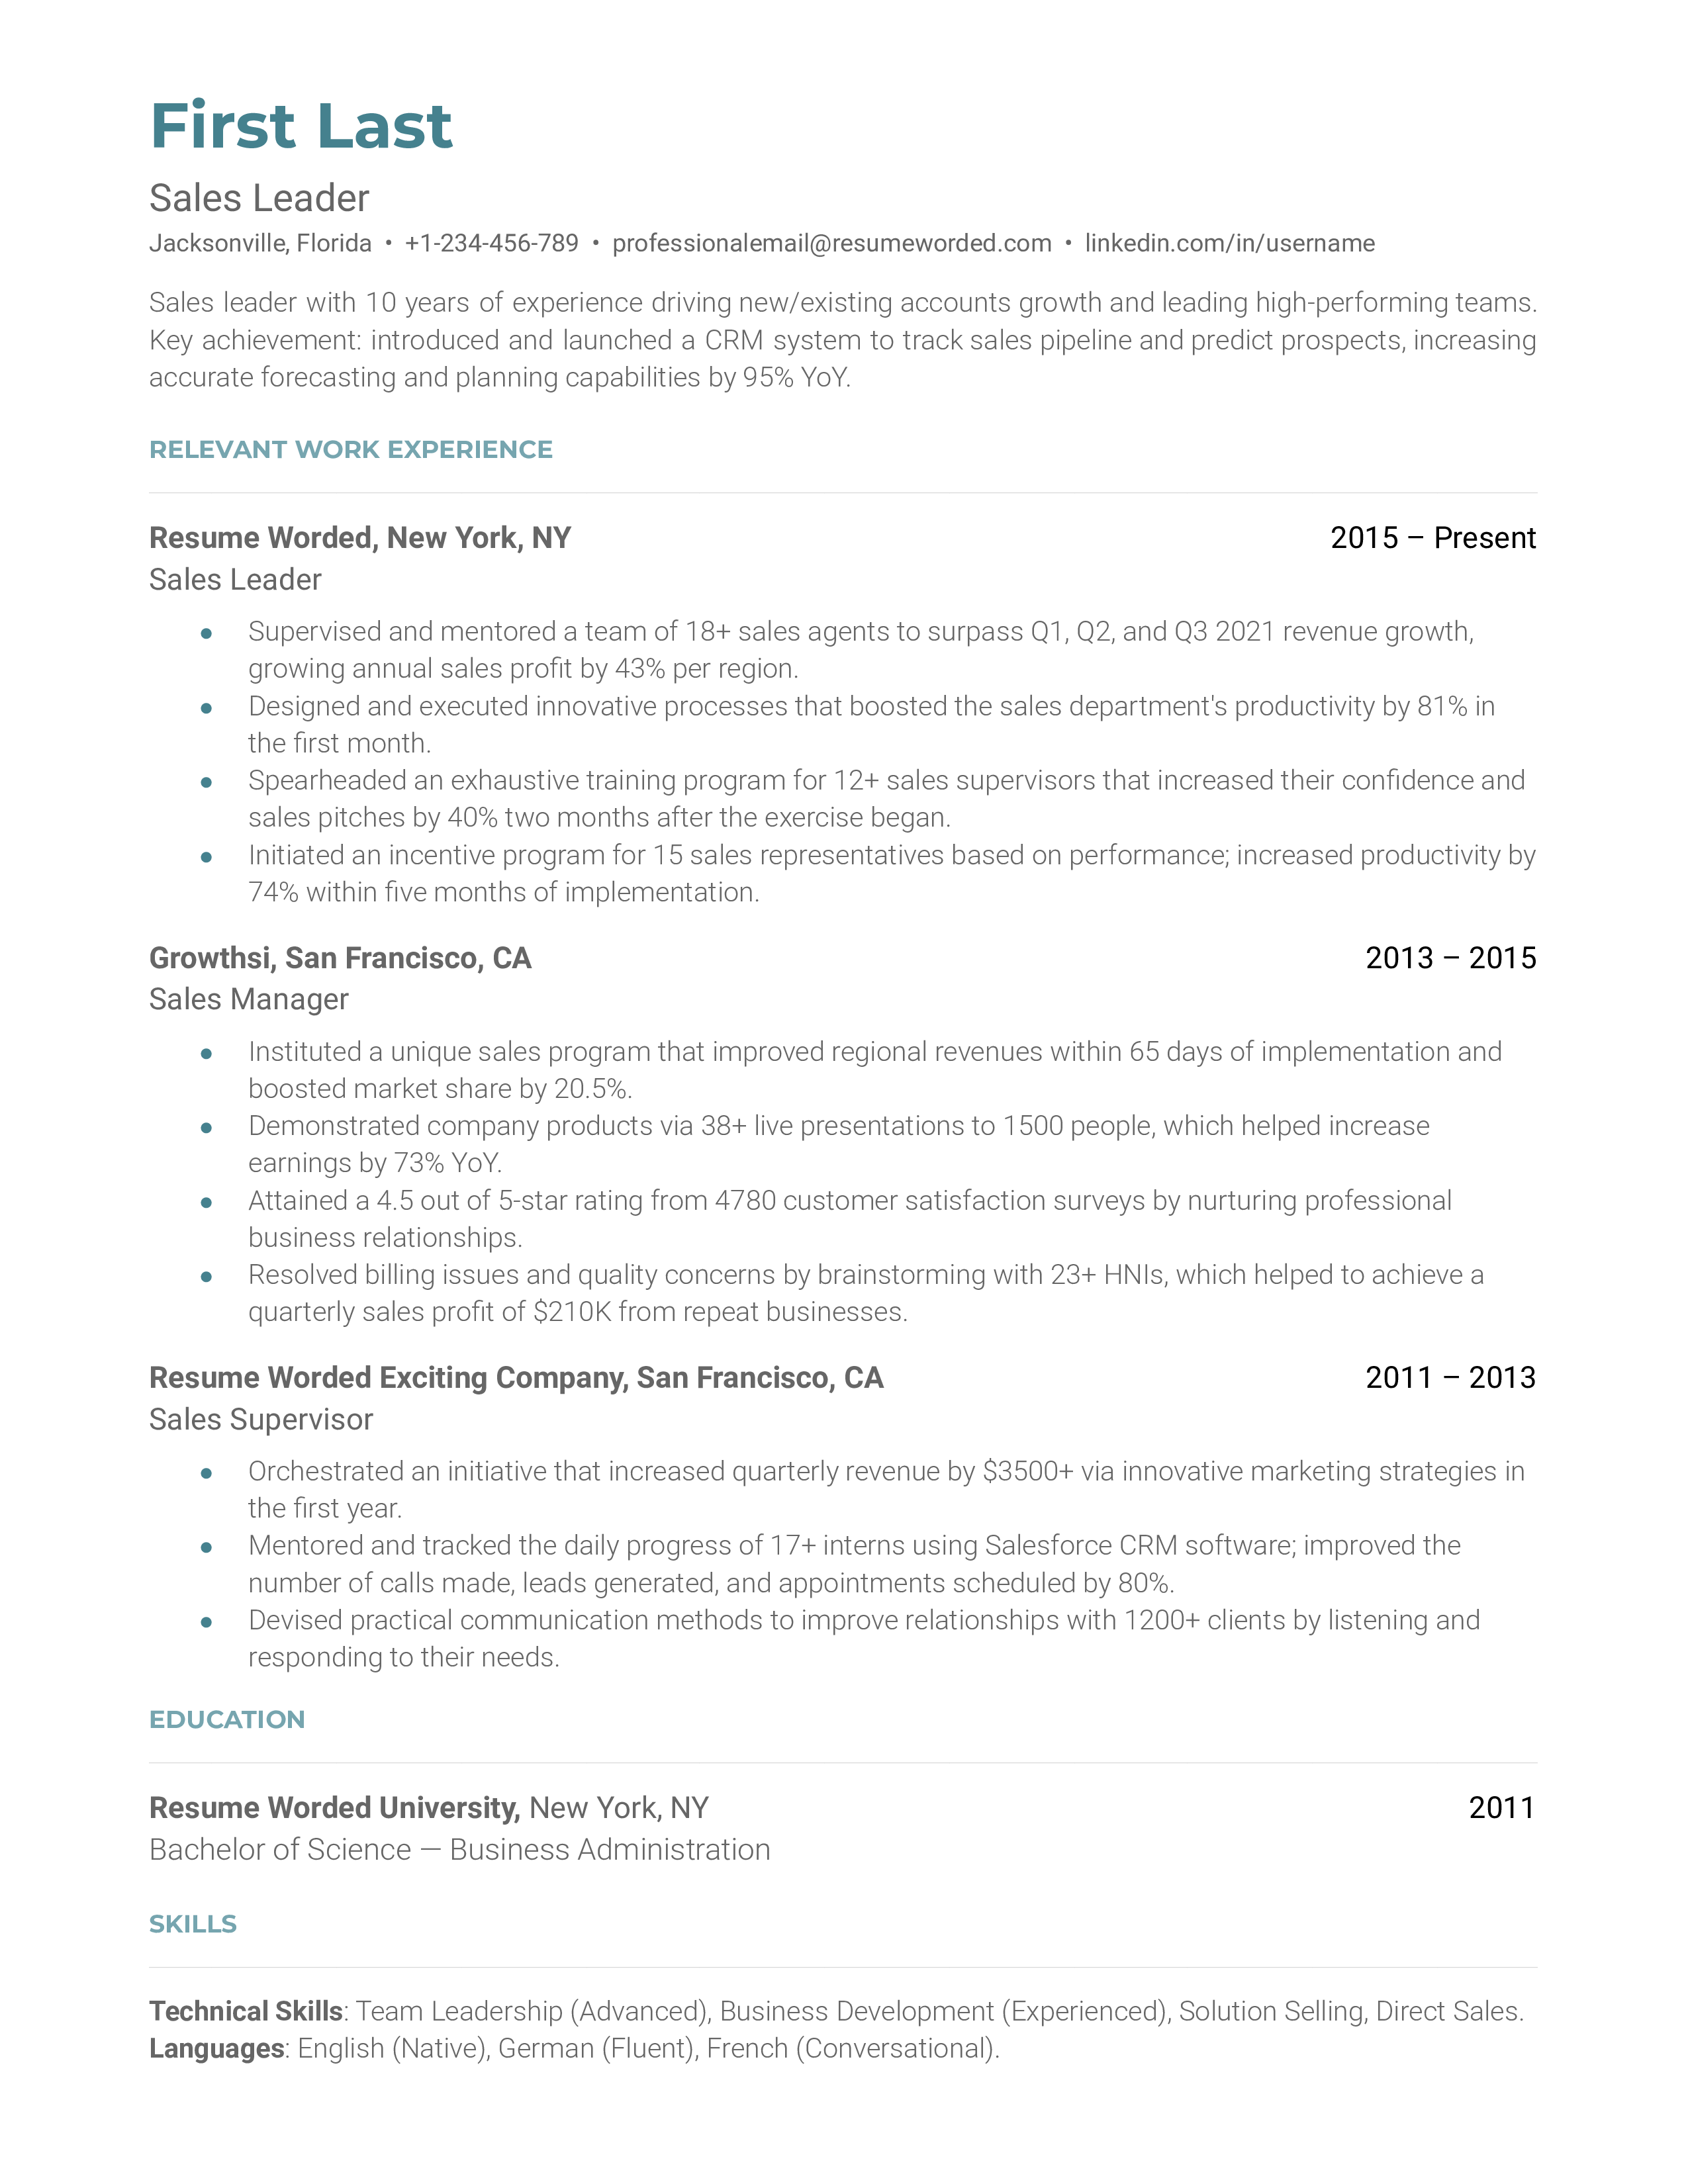  A sales leader resume template that uses industry-relevant keywords. 